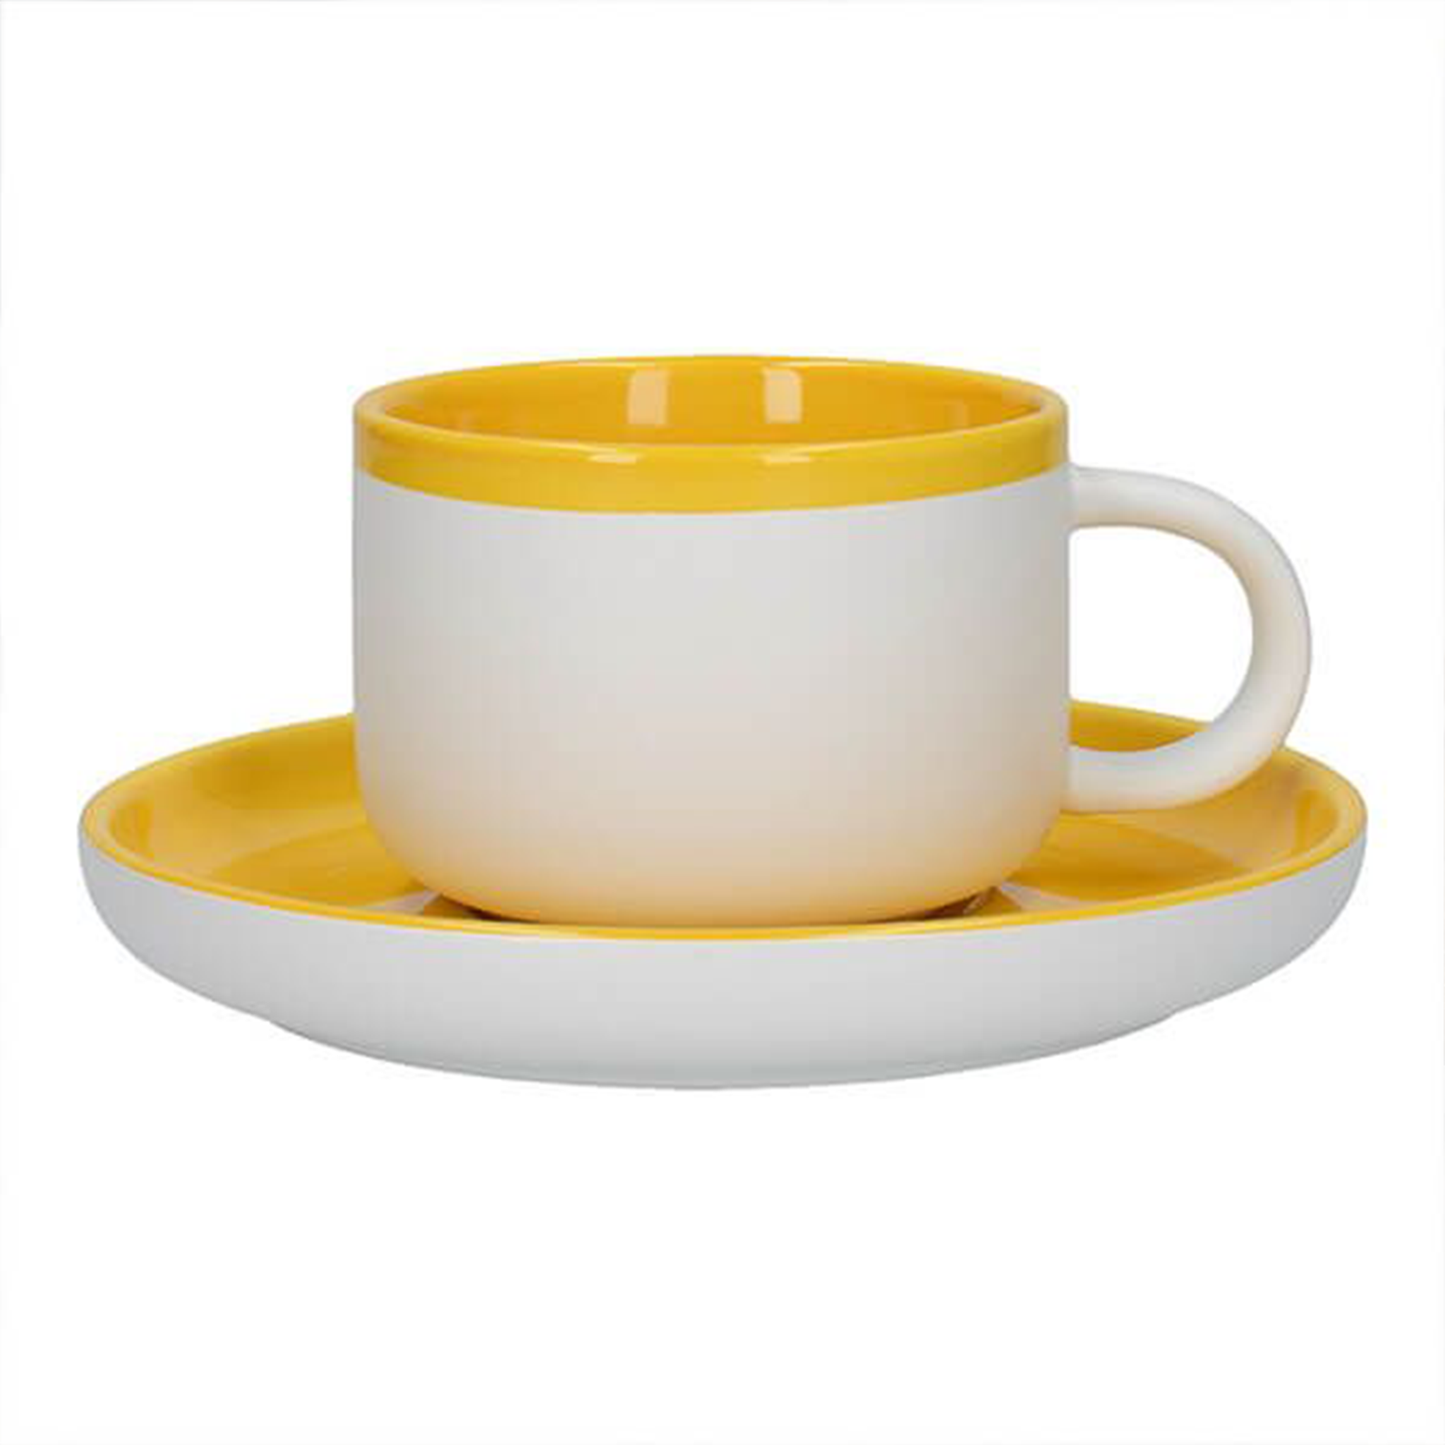 a white tea cup with a yellow rim and interior sat atop a saucer with a yellow top and white bottom